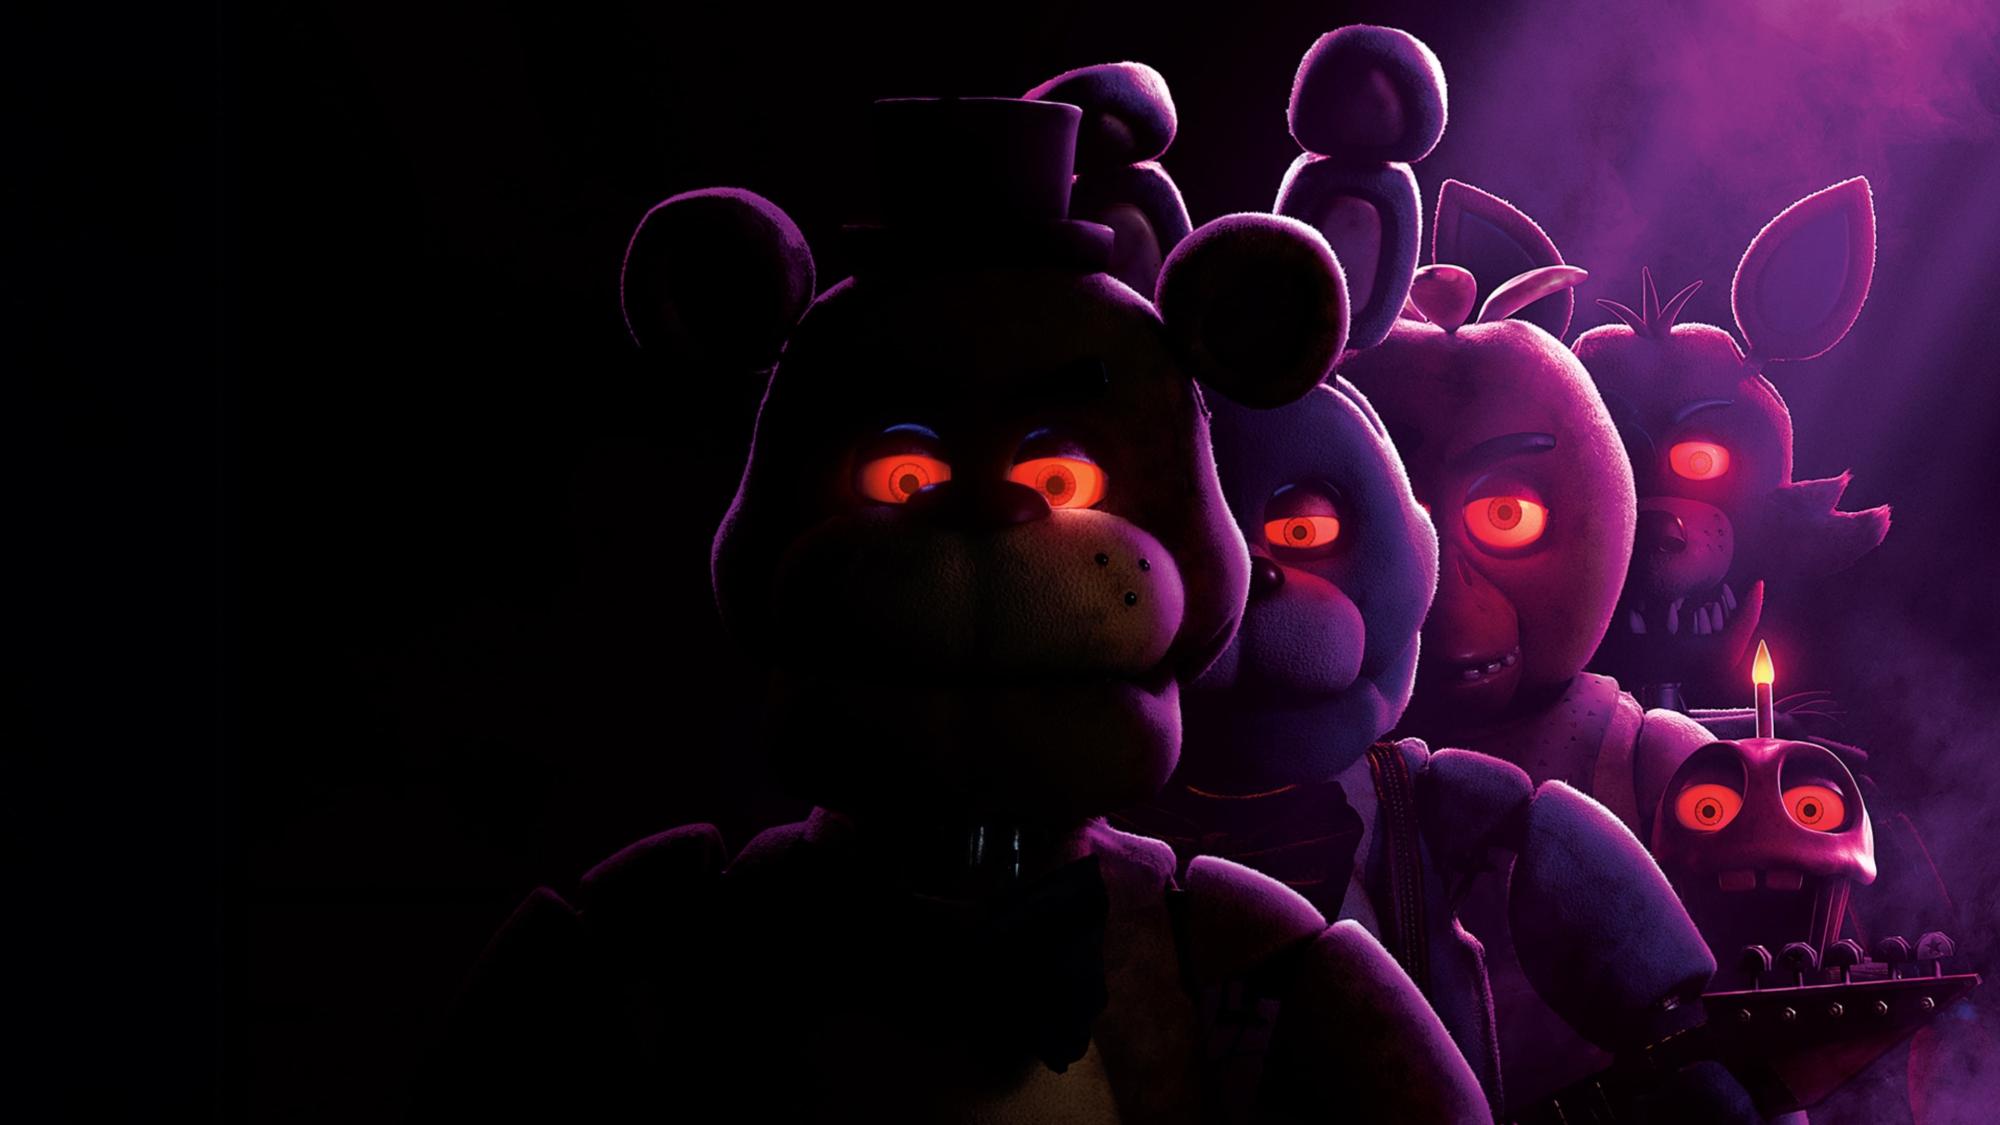 Backdrop Image for Five Nights at Freddy's